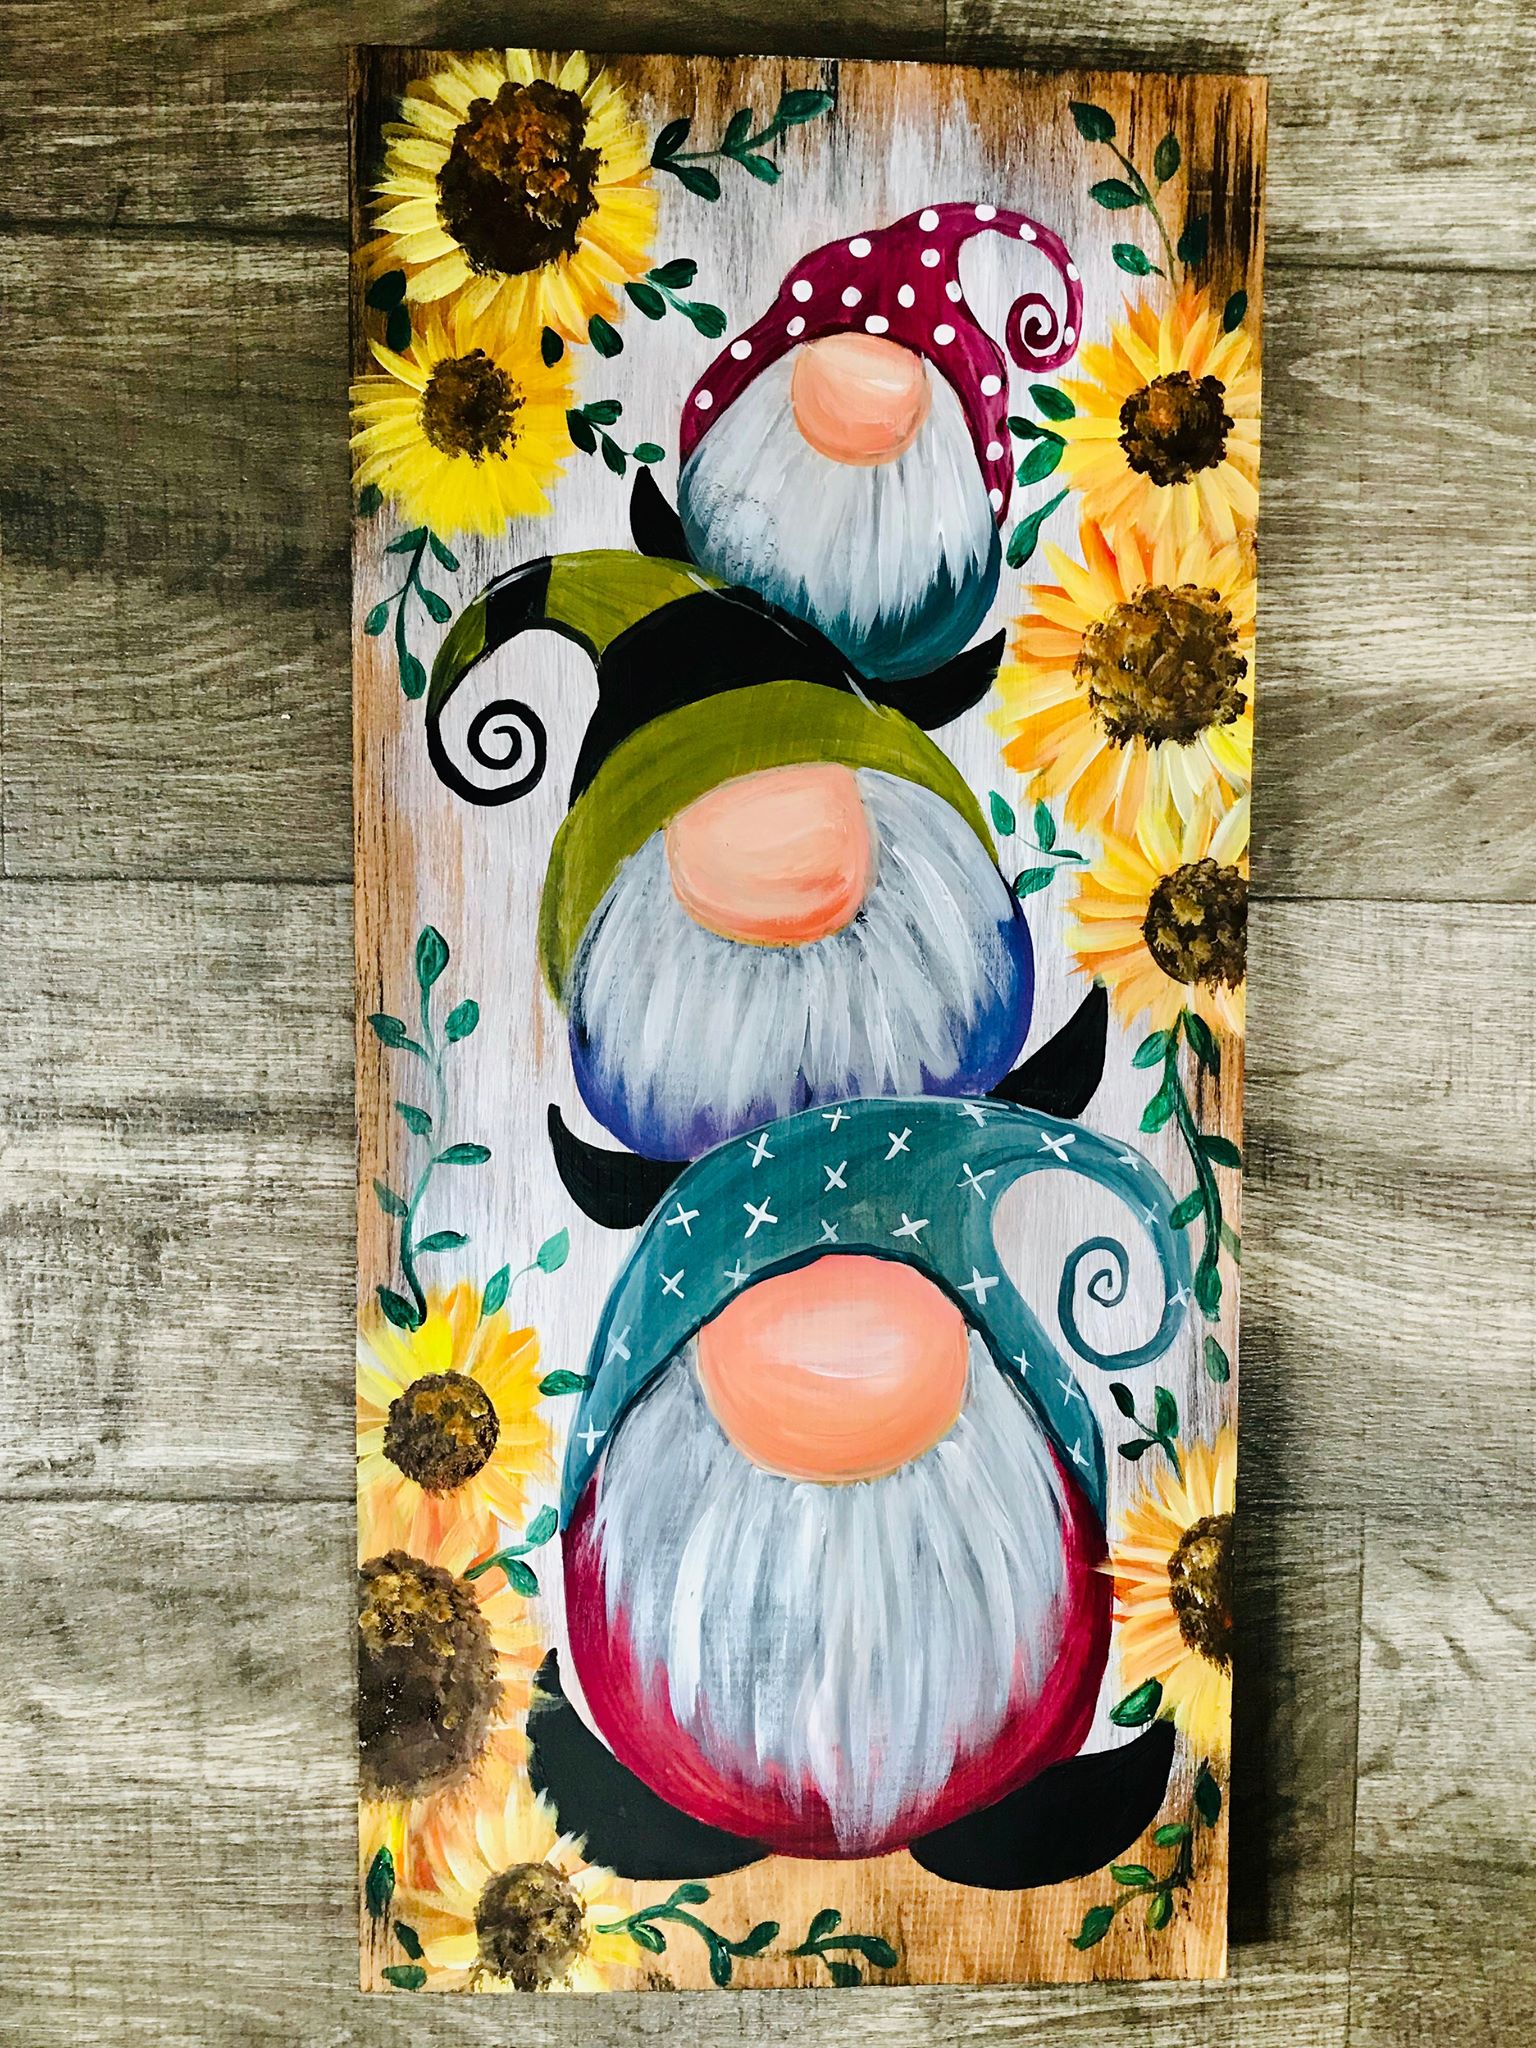 Three Gnomes at Creatively Uncorked https://creativelyuncorked.com/